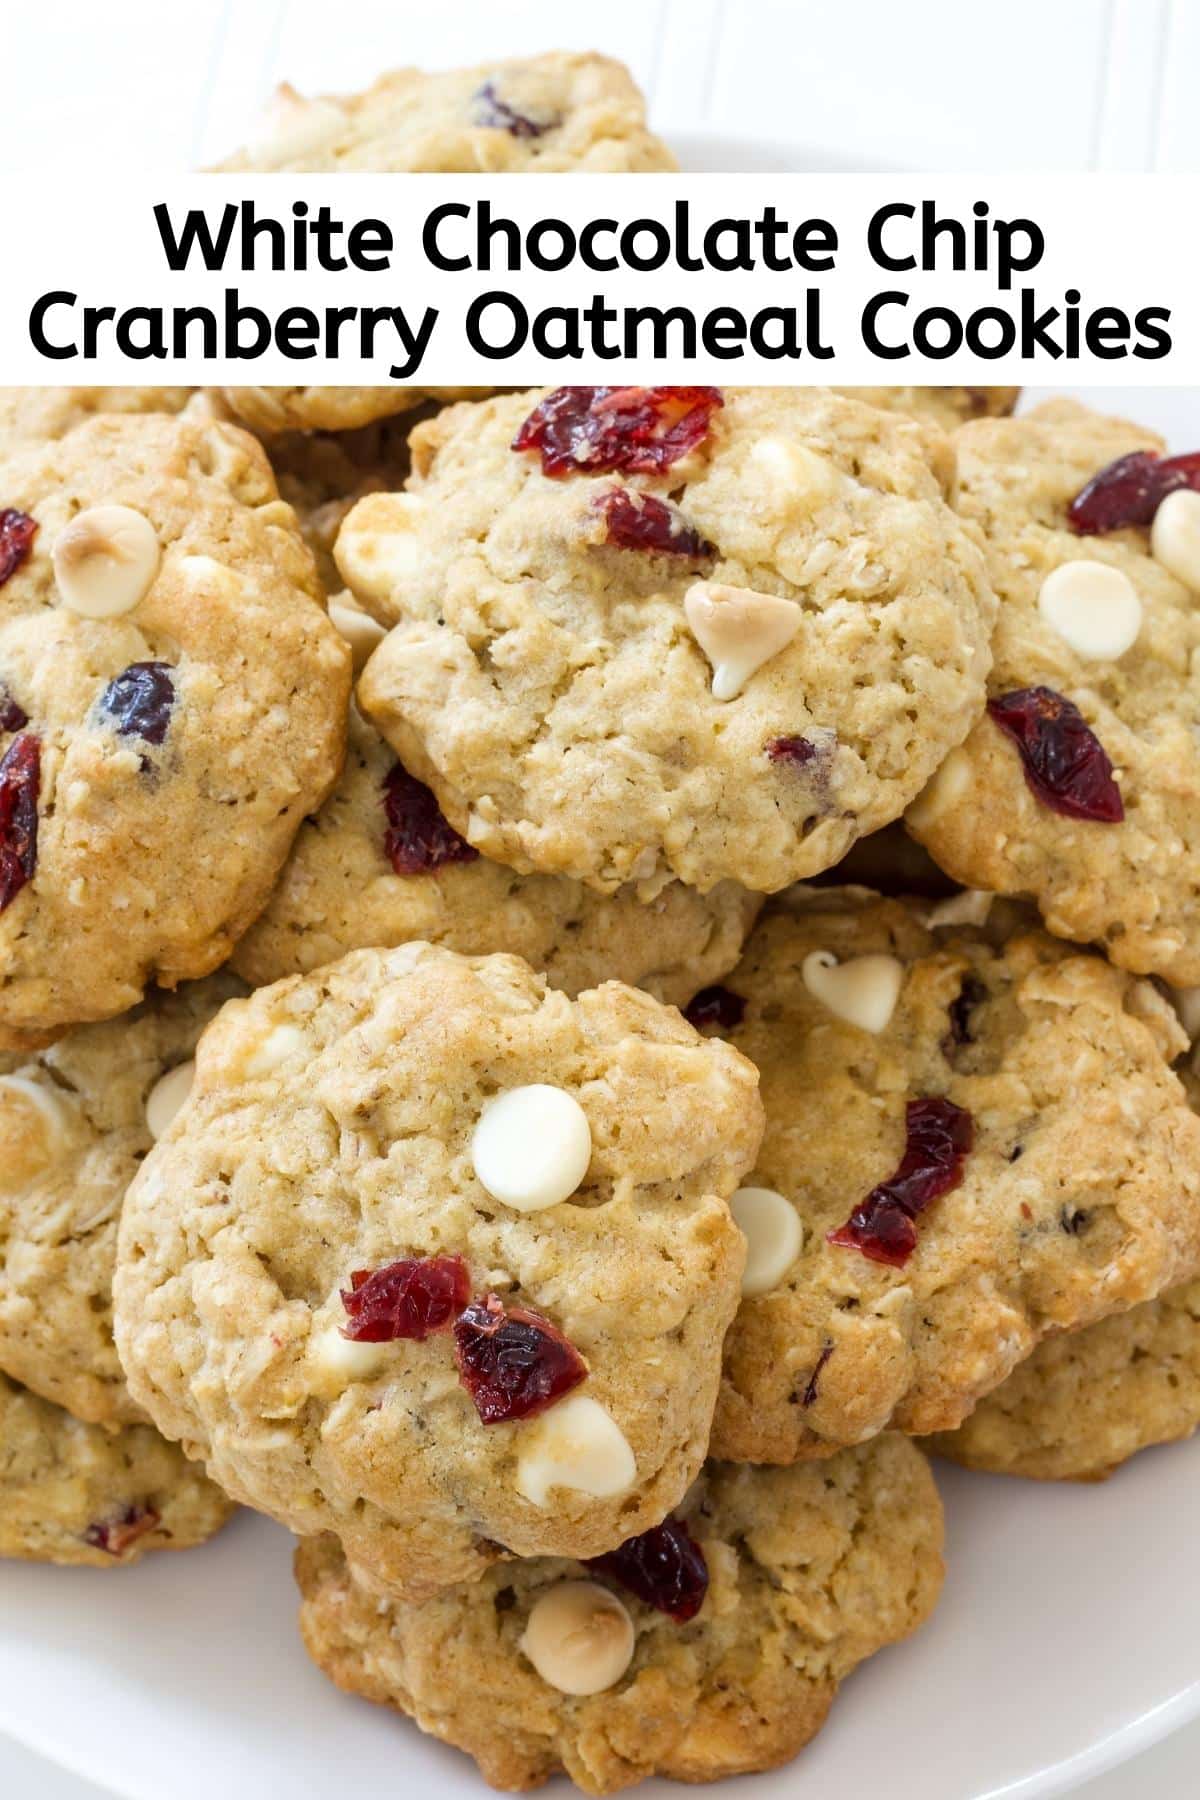 Soft Oatmeal White Chocolate Chip Cranberry Cookies are perfectly sweet and tart. Great for holiday cookie exchanges or any time of the year! via @mindyscookingobsession